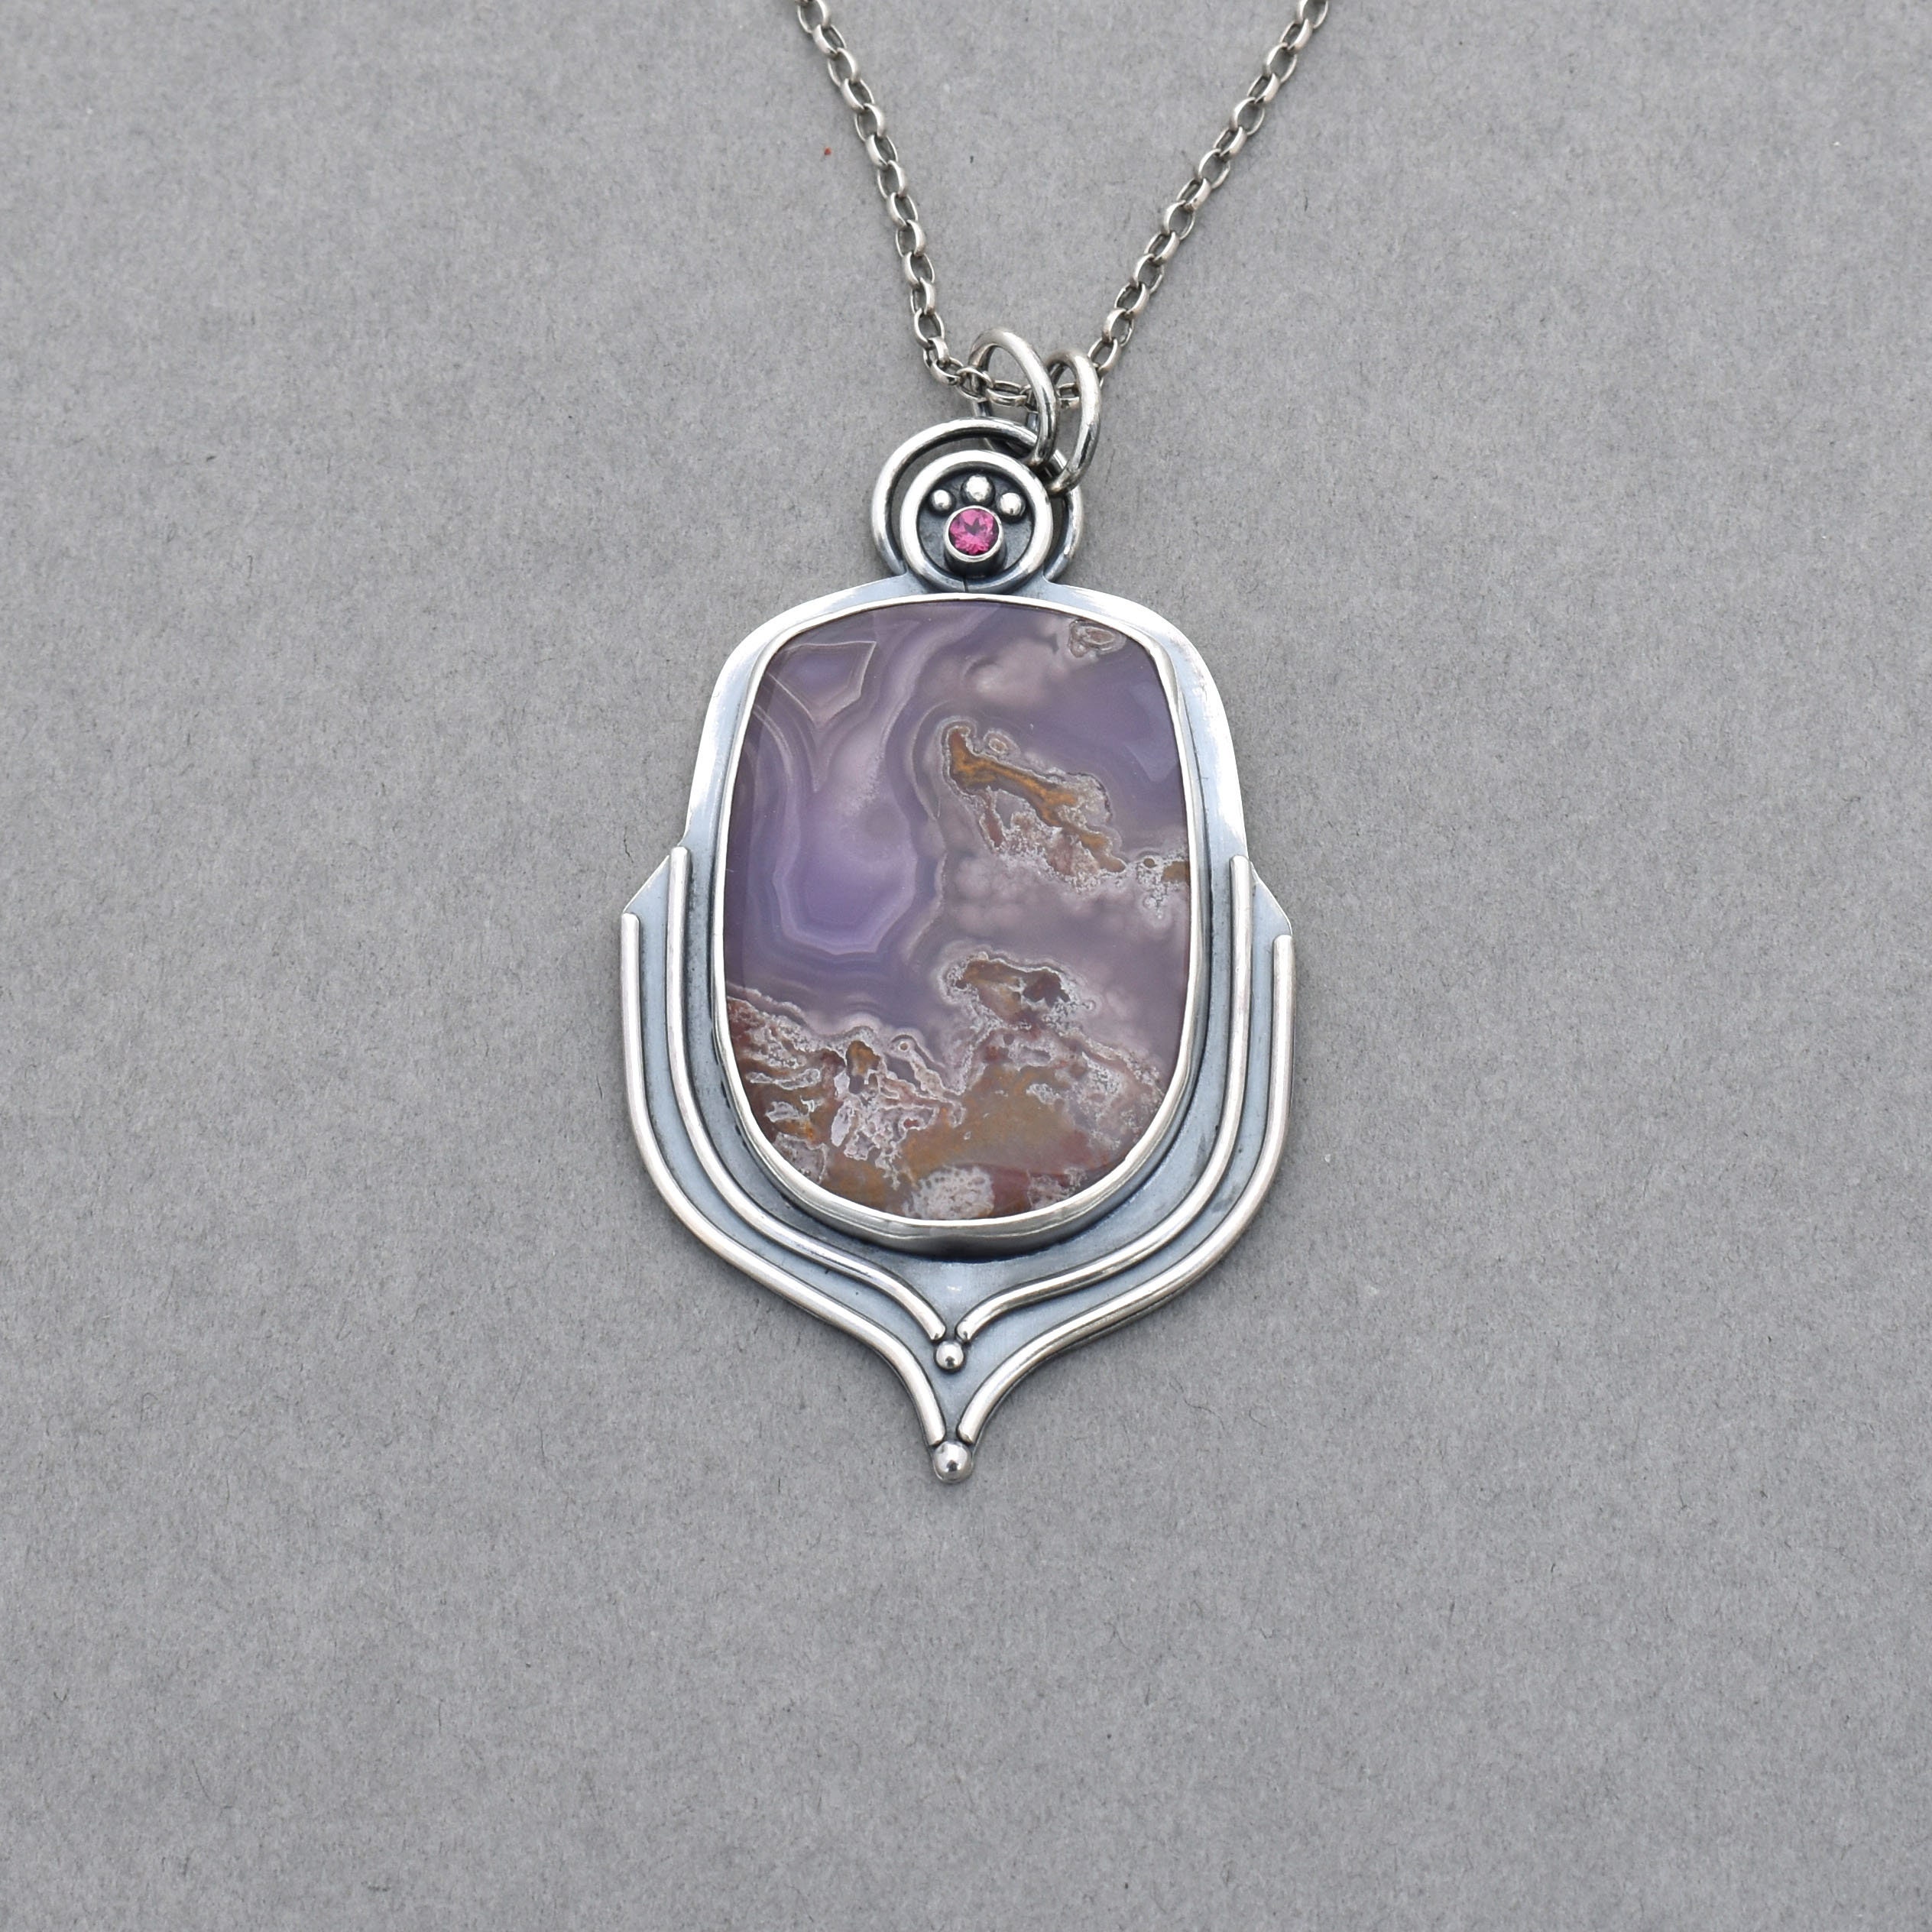 Agua Nueva Agate Pendant. Curvy Purple Agate Necklace With Floral  Impression. Flower Blossom Jewelry. Handcrafted Statement Jewelry. - Etsy